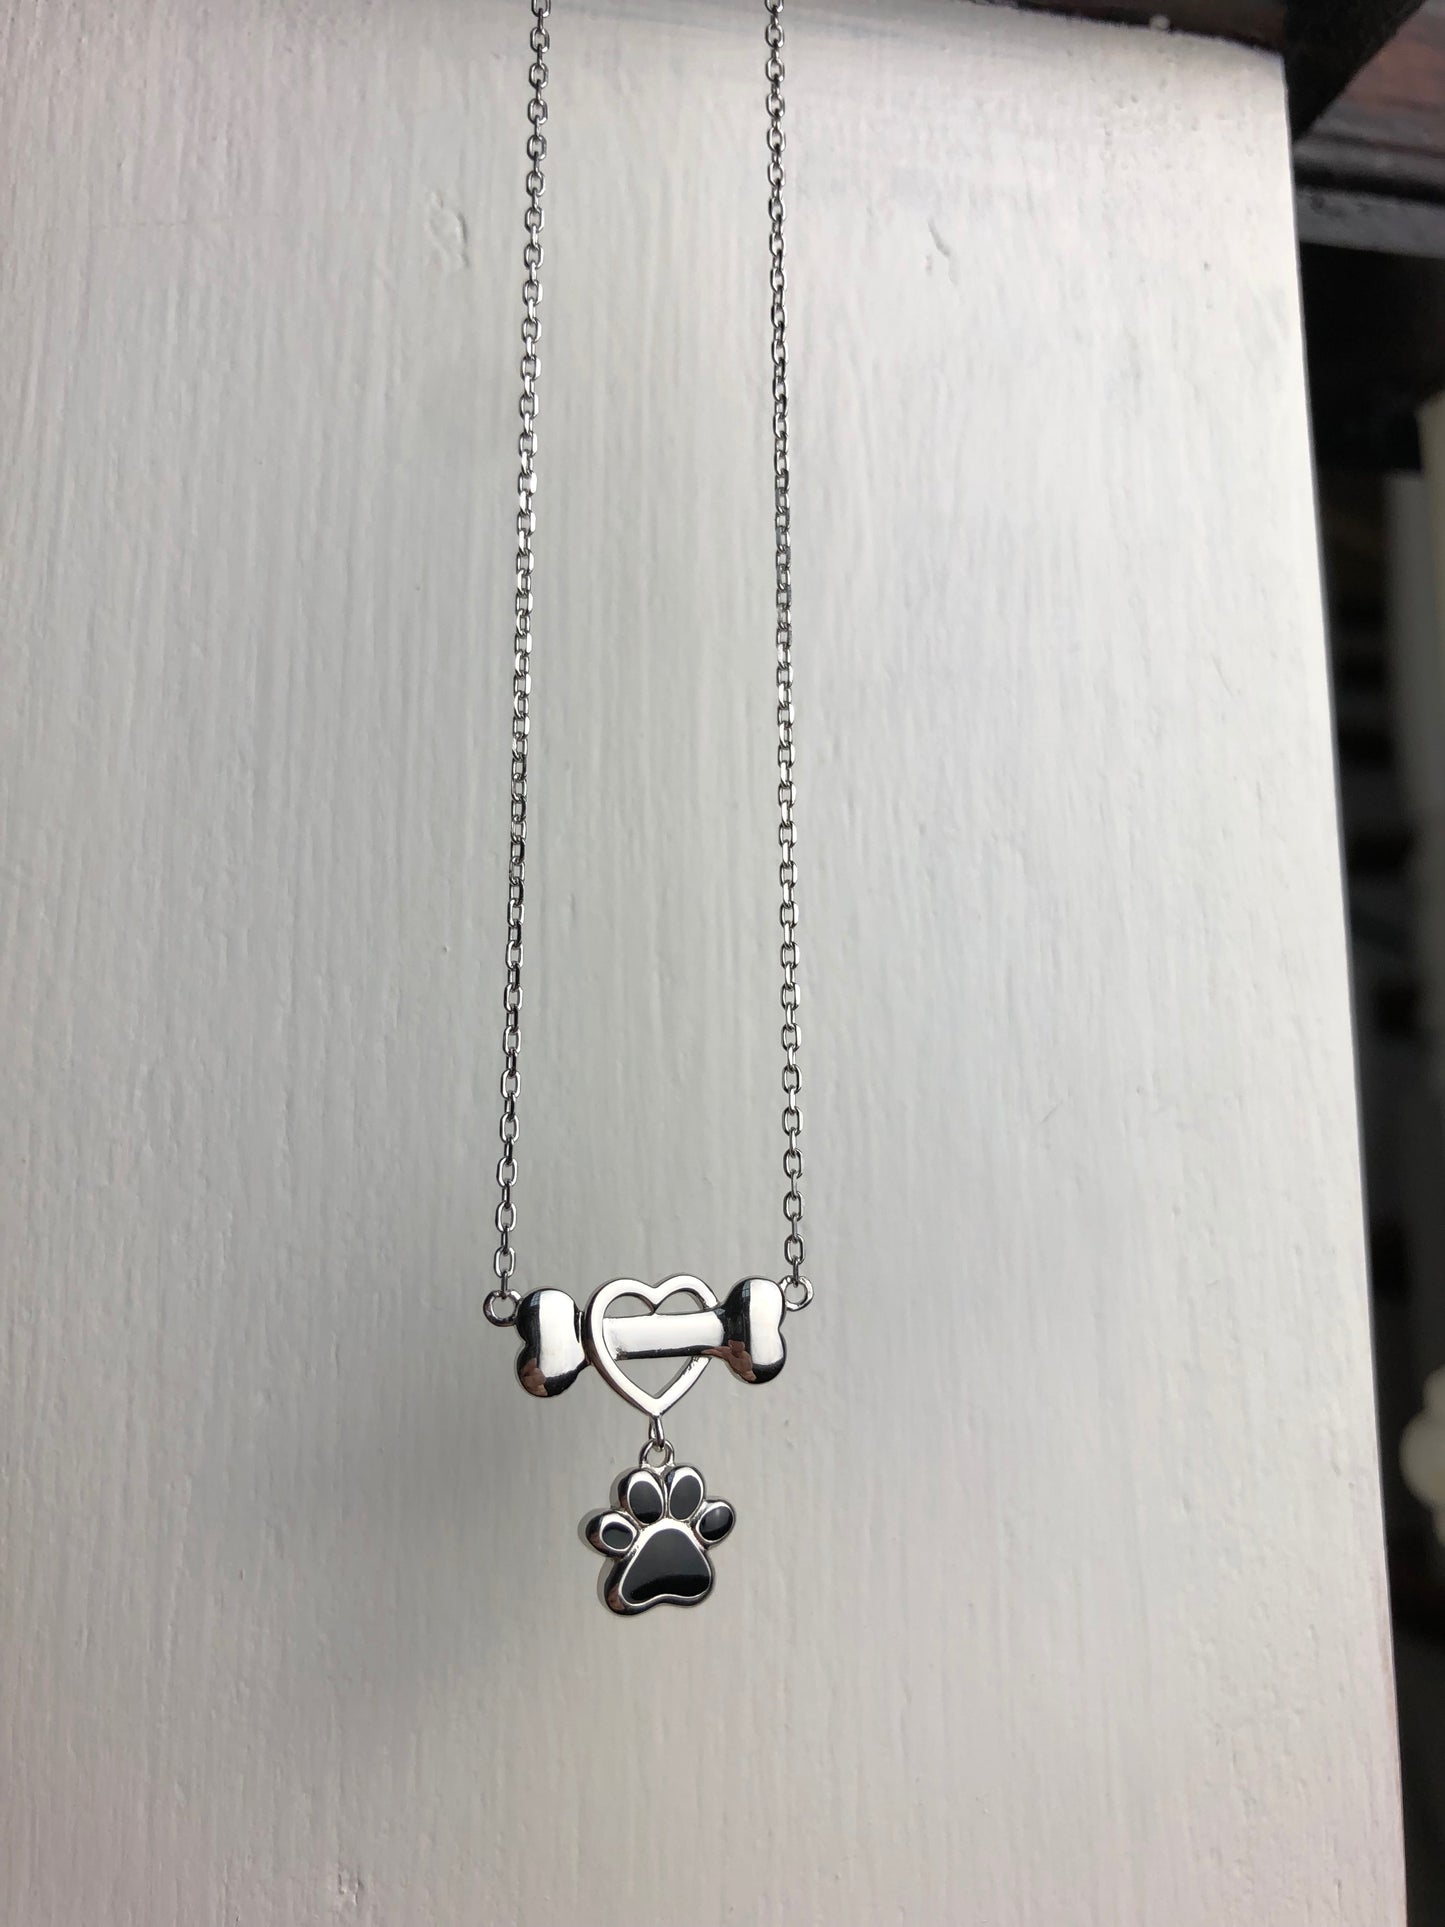 Hanging Paw Necklace